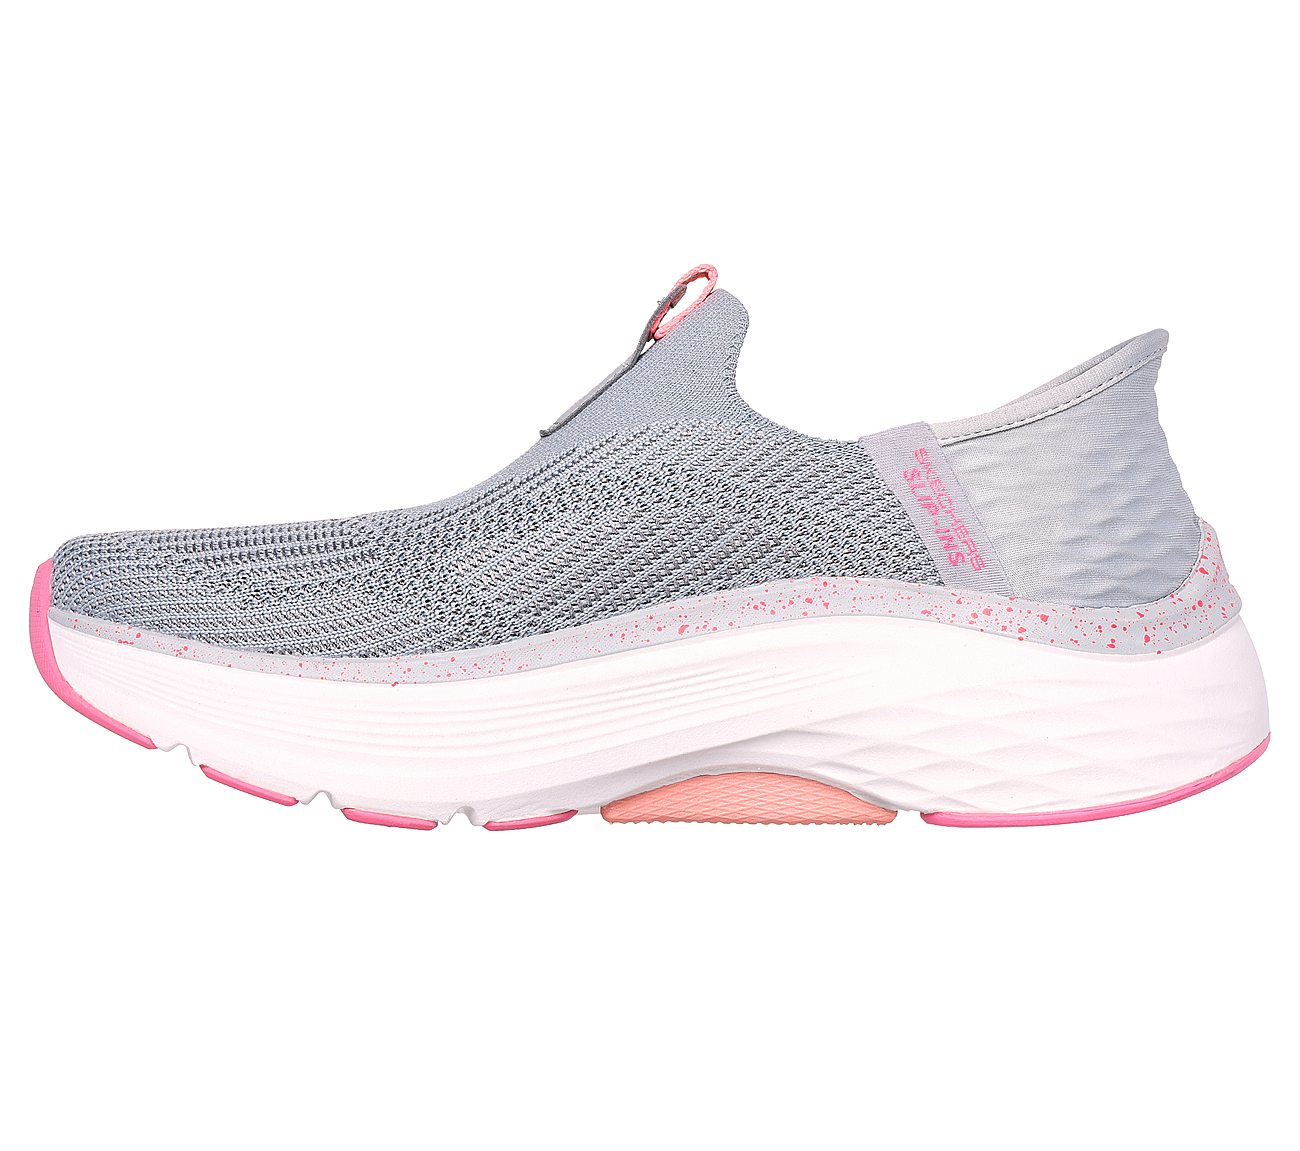 Skechers Slip-ins Max Cushioning Arch Fit - Fluidity, GREY/PINK Footwear Left View